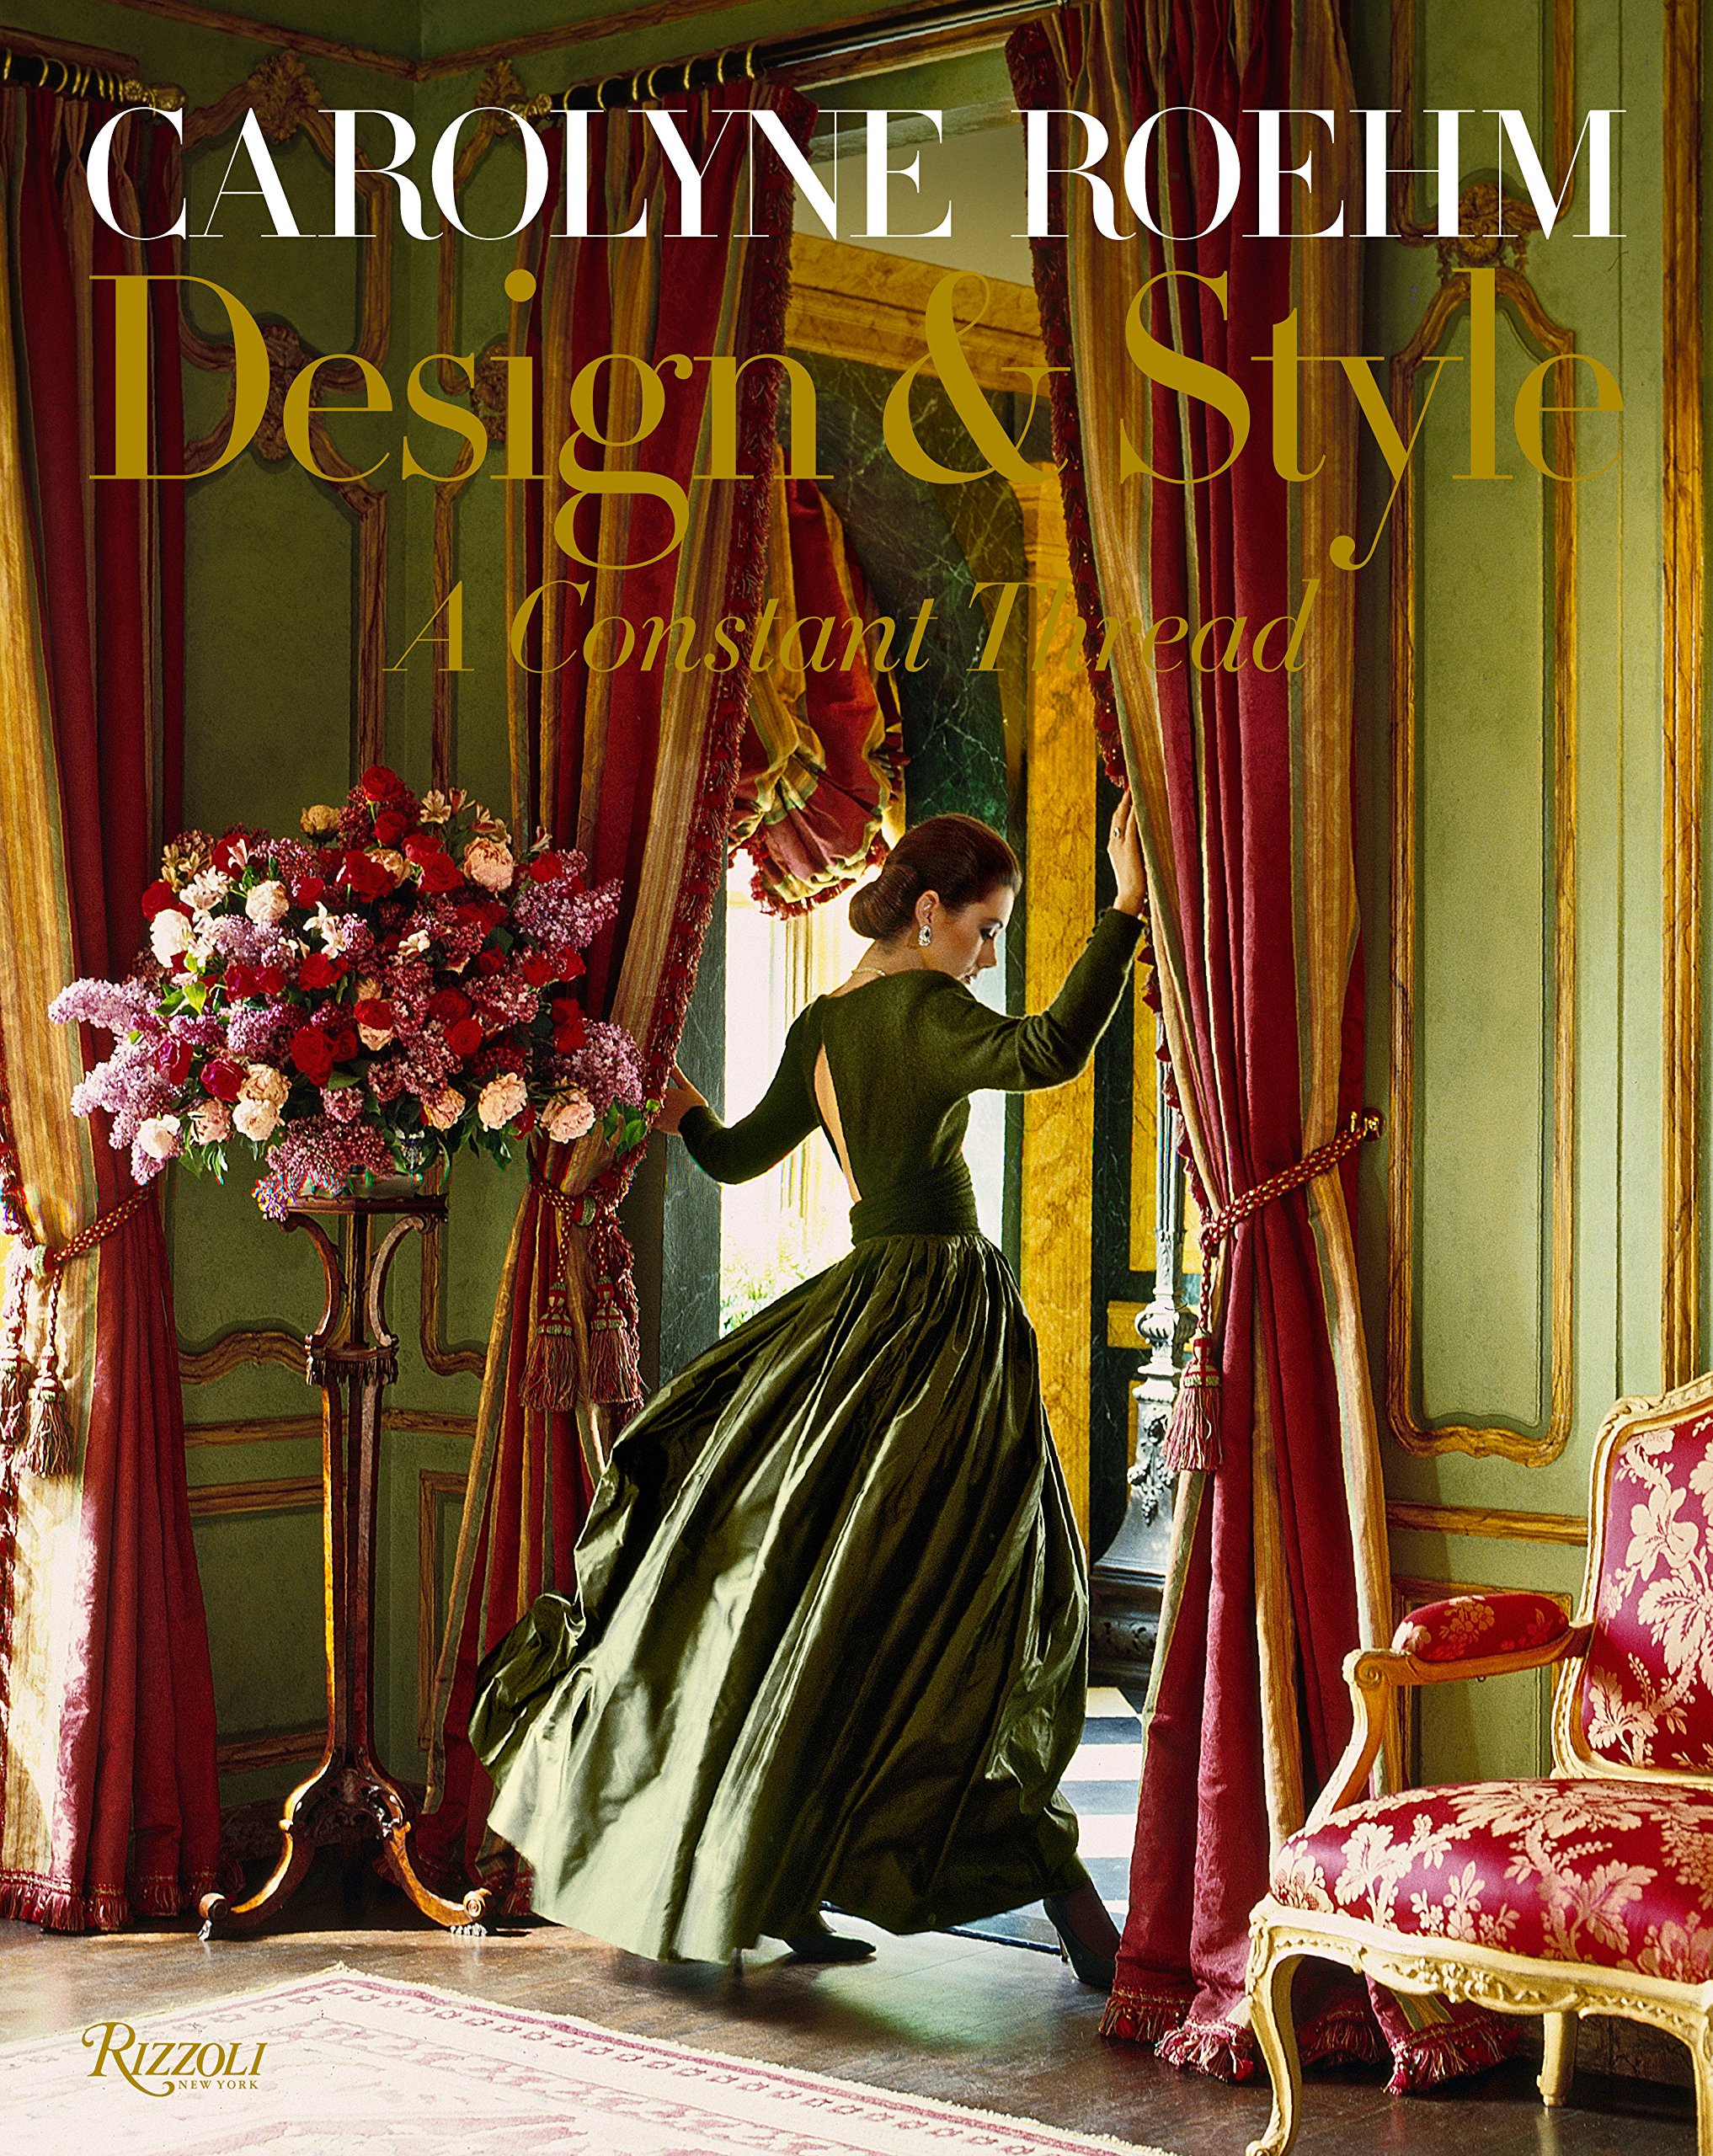 Design & Style: A Constant Thread by Carolyne Roehm Book